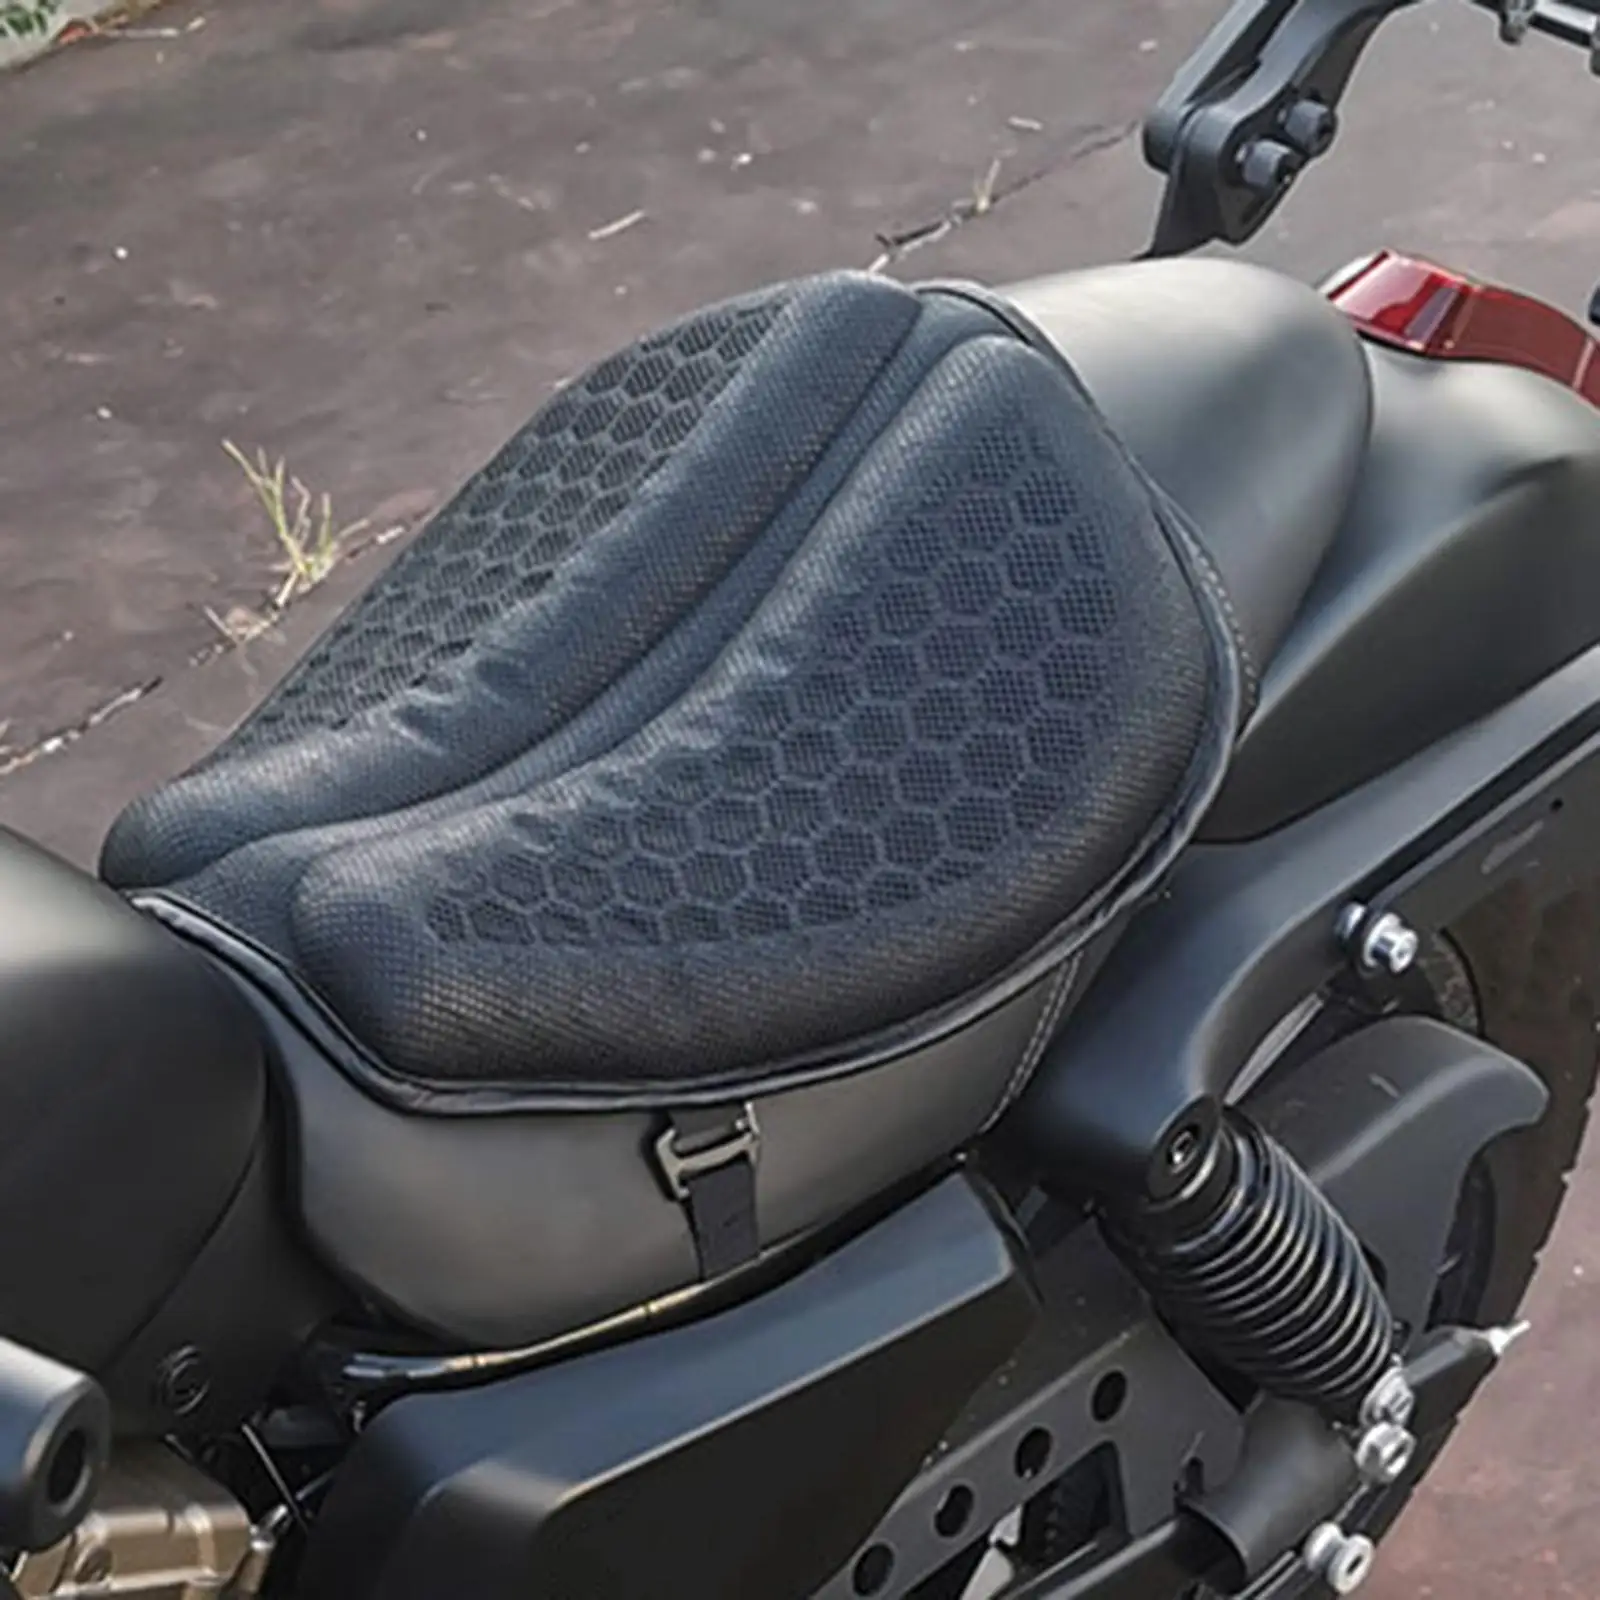 Motorcycle Seat Cushion Cover Shock Absorb Comfortable for Dirt Bikes